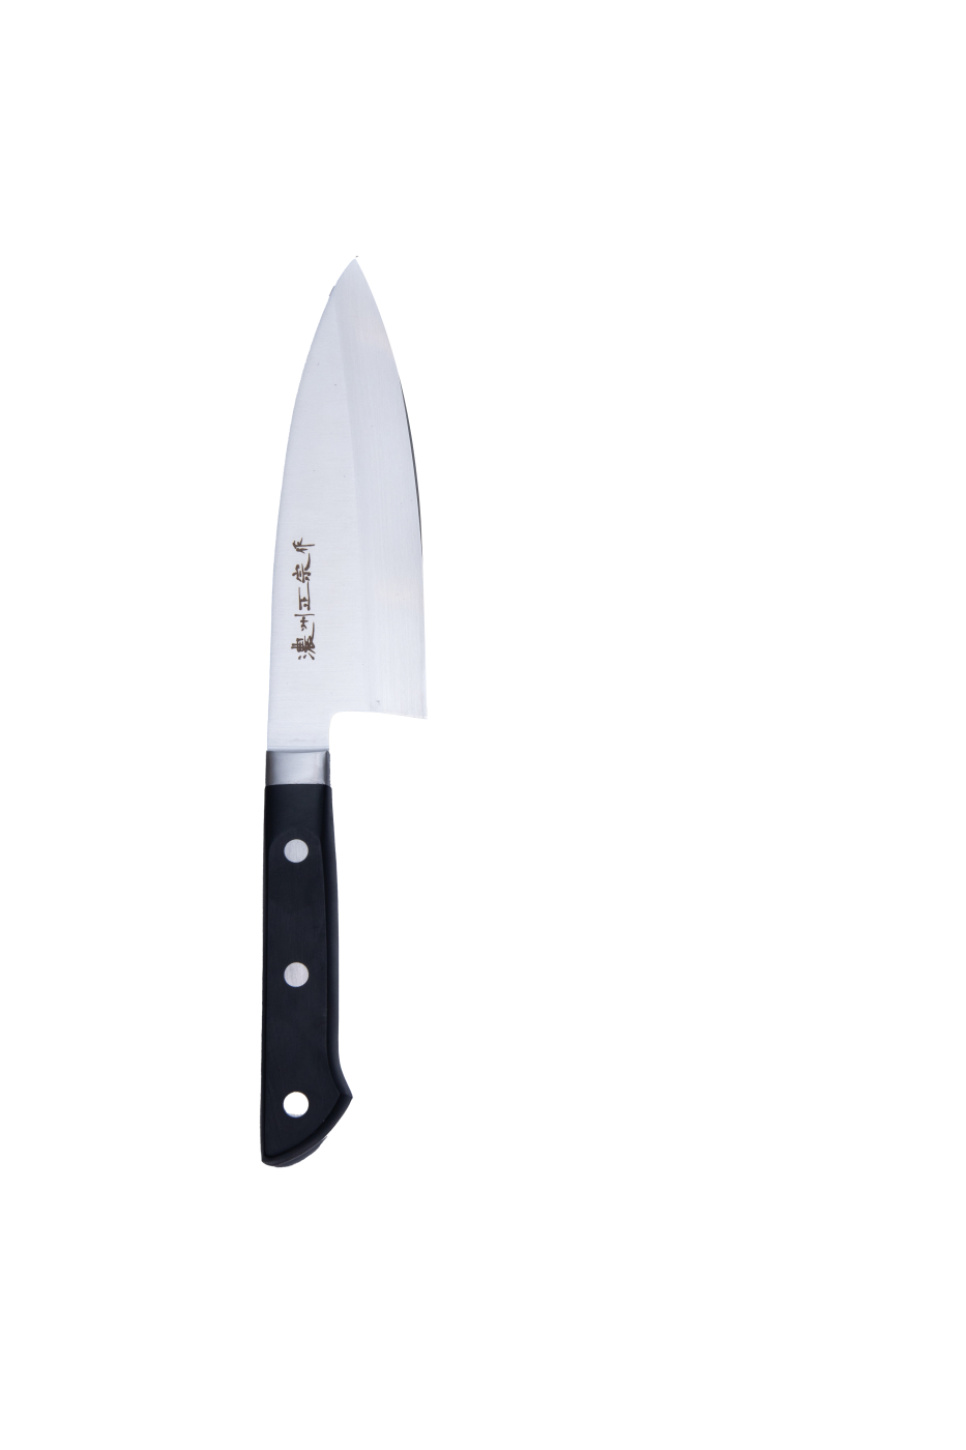 Deba 16cm - Pro House in the group Cooking / Kitchen knives / Filet knives at KitchenLab (1450-27646)